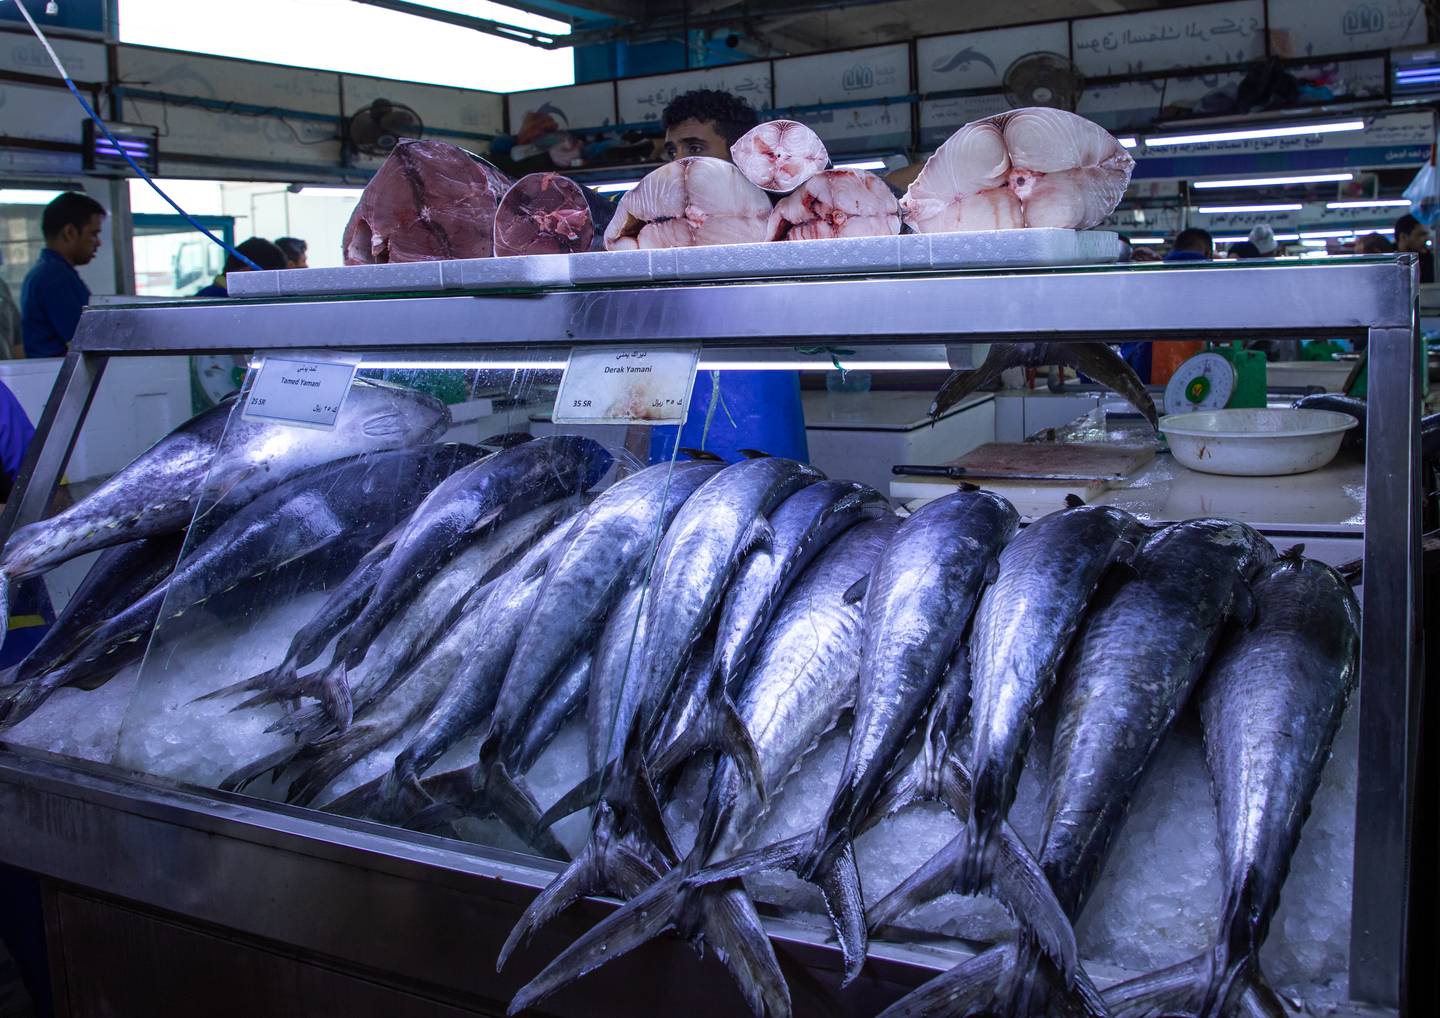 A stall in Jeddah's fish market. Getty Images